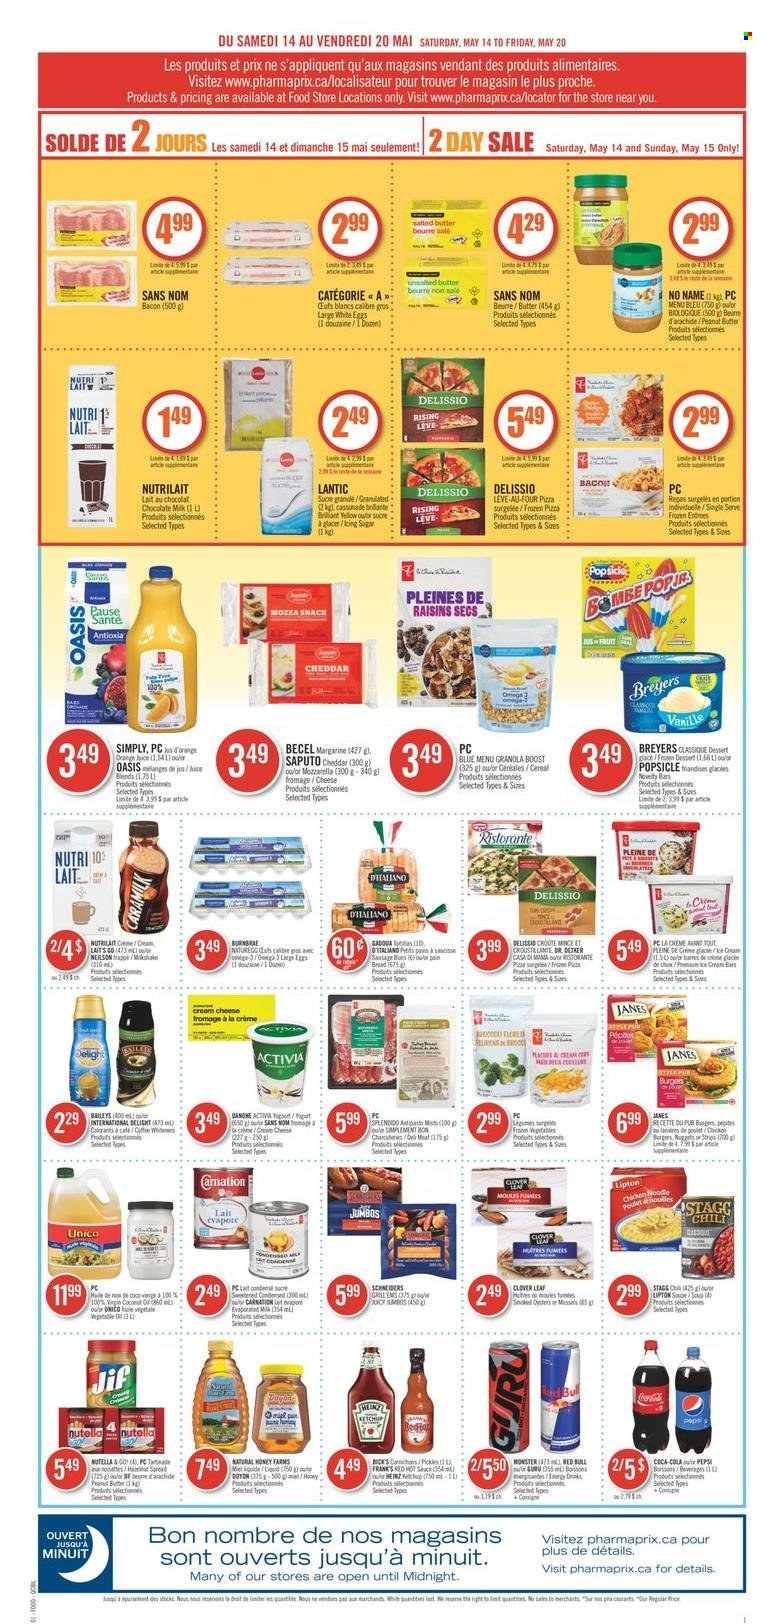 thumbnail - Pharmaprix Flyer - May 14, 2022 - May 20, 2022 - Sales products - buns, clams, oysters, No Name, pizza, soup, bacon, cream cheese, cheddar, Clover, Activia, butter, margarine, chocolate, cereals, honey, Jif, dried fruit, Coca-Cola, Monster, Red Bull, Boost, lid, Omega-3, granola, LG, raisins, Nutella, Danone, Lipton, oranges. Page 4.